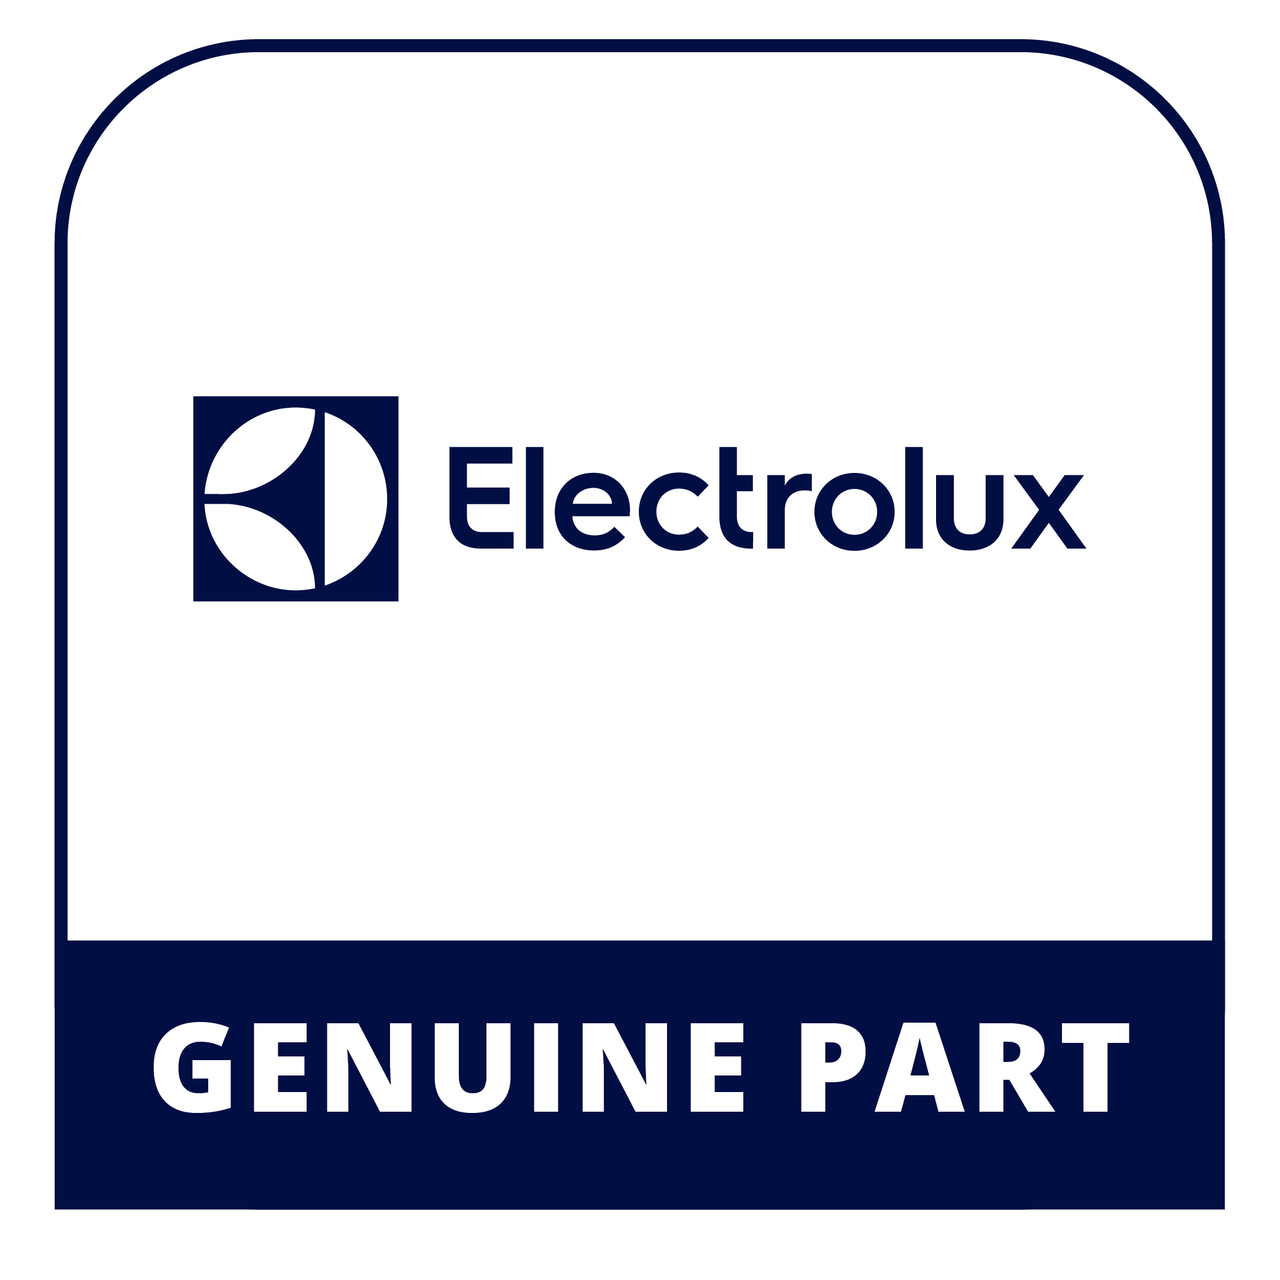 Frigidaire - Electrolux 316902003 Owners Manual - Genuine Electrolux Part